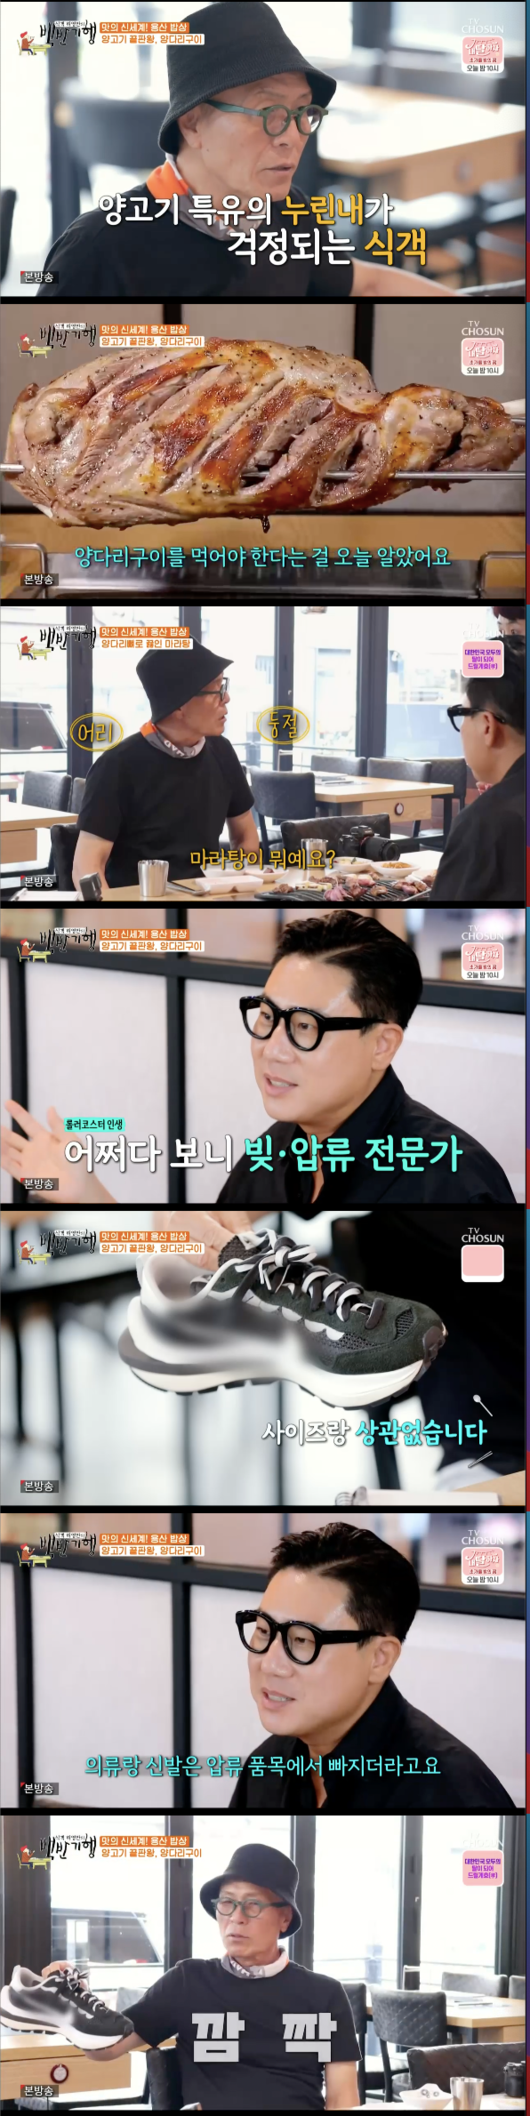 Lee Sang-min, a white-half-time, has been honest about the current situation.Singer Lee Sang-min appeared on the TV Chosun Huh Young Mans Food Travel broadcast on the 3rd, and Huh Young-man and Yongsan enjoyed food.They found a grilled house. Huh Young-man said it was a little far from lamb. Its too greasy to eat often, he said.Lee Sang-min said of his hobby, There are a lot of clothes and shoes. There are about 400 pairs of shoes.Huh Young-man was surprised and asked, How many million won is there?Lee Sang-min showed the shoes that he reported and said, This time was 200,000 won when I lived, but now it is 1 million won.Huh Young-man said after tasting the grilled legs, I do not have a unique catch.I was tired of eating too much lamb when I painted a cartoon related to Chingiz Khan, but this is delicious.The sheep are more than 12 months old, and they have a lot of fun, explained Lee Sang-min, who explained the secret to the taste.I knew today that I had to eat a grilled leg to taste the real lamb. The remaining bones and flesh boiled Malatang. Huh Young-man first tried Malatang.Lee Sang-min admired the Malatang visual with the cucumber, and praised it as the best Malatang I have ever eaten.At the words of Lee Sang-min, Huh Young-man tasted Malatang and coughed and laughed at the spicy taste.The two legs are in Malatang and its cooler and more delicious, Lee Sang-min said.When I see Lee Sang-min, I think of a saying: first class laughers, second class bearers, third class cryers.Youre a first-class person like Lee Sang-min, he said. How many years have you owed that?Lee Sang-min said, In 2005, the total amount of debt was 6.97 billion won.Huh Young-man asked, Have you almost paid it off? Lee Sang-min replied, There are still three minutes left to pay the debt.Huh Young-man then asked, What do you like to eat? Lee Sang-min said, Nothing is hidden. When many people were not interested, they bought and ate squid.When it was 5,000 won for 1kg, it can not be so delicious in the world if you bake it in a single-spot butter. After I went on the air, I heard from the squid seller, who said, I started importing squid, he said.Huh Young-man even wrote a note saying, It would be delicious to listen.Meanwhile, Lee Sang-min confessed to the fact of sperm freezing and surprised Huh Young-man.TV Chosun Huh Young Mans Food Travel broadcast screen capture